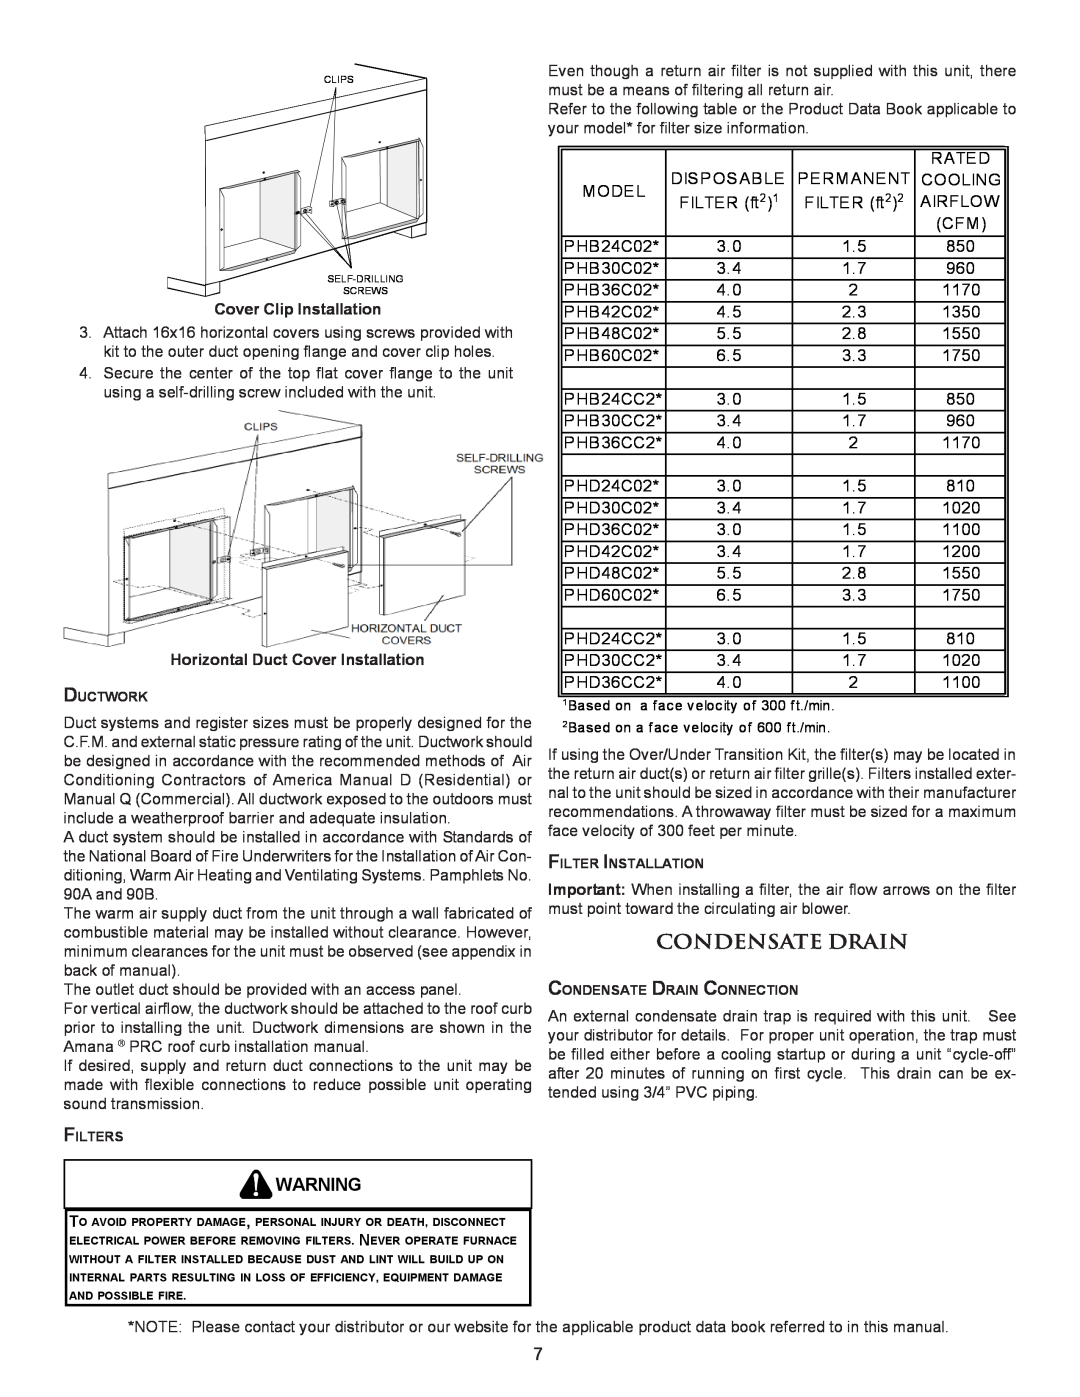 Amana PACKAGE HEAT PUMP installation instructions Condensate Drain 